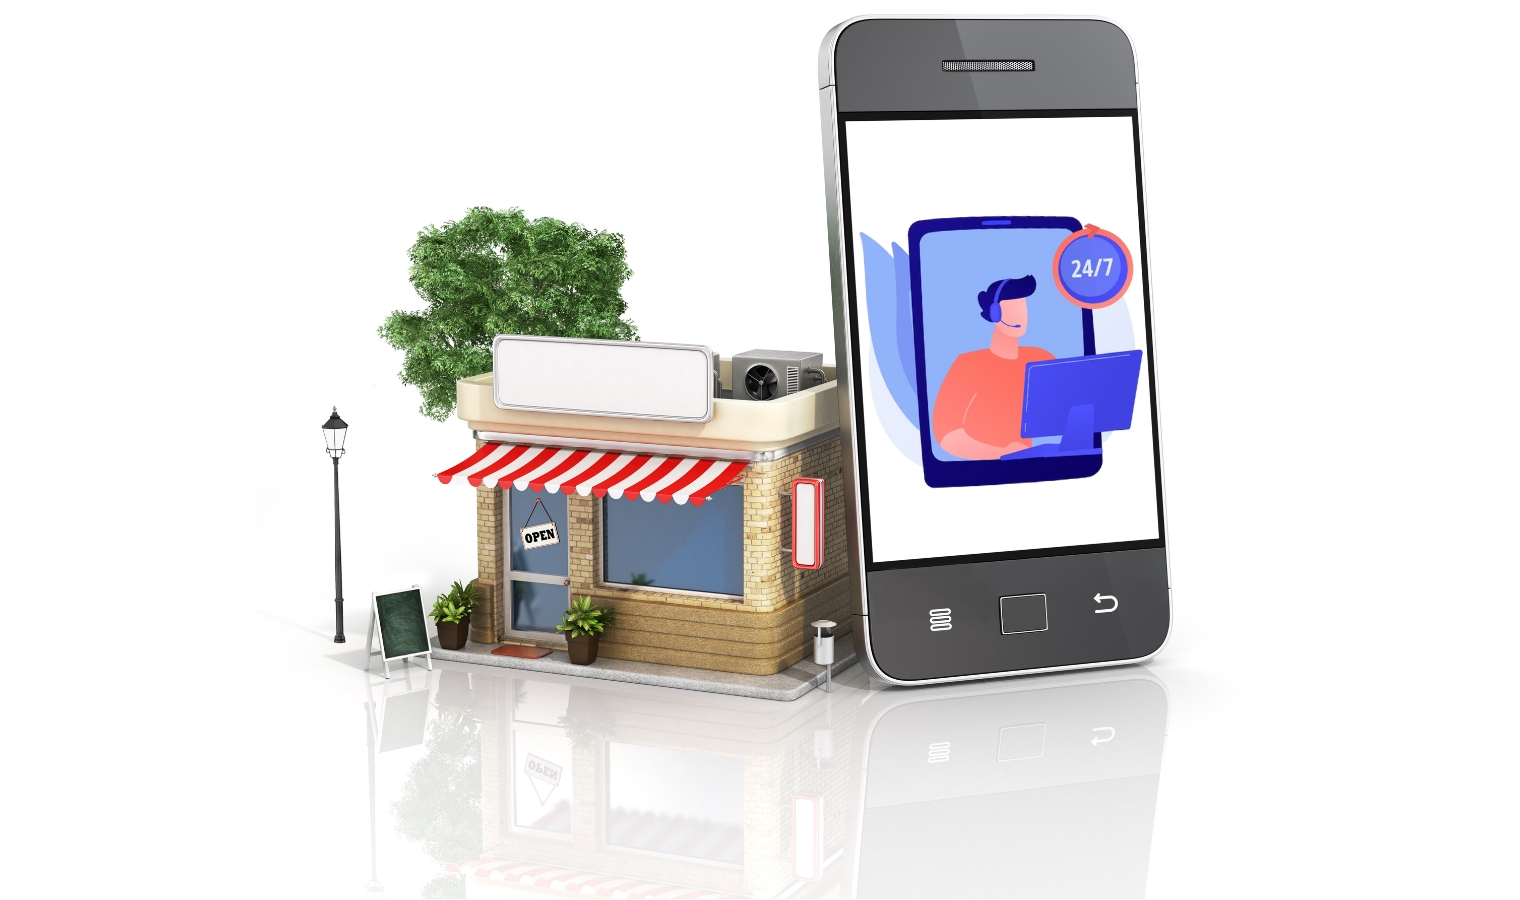 Call service is essential for your online store, DSers